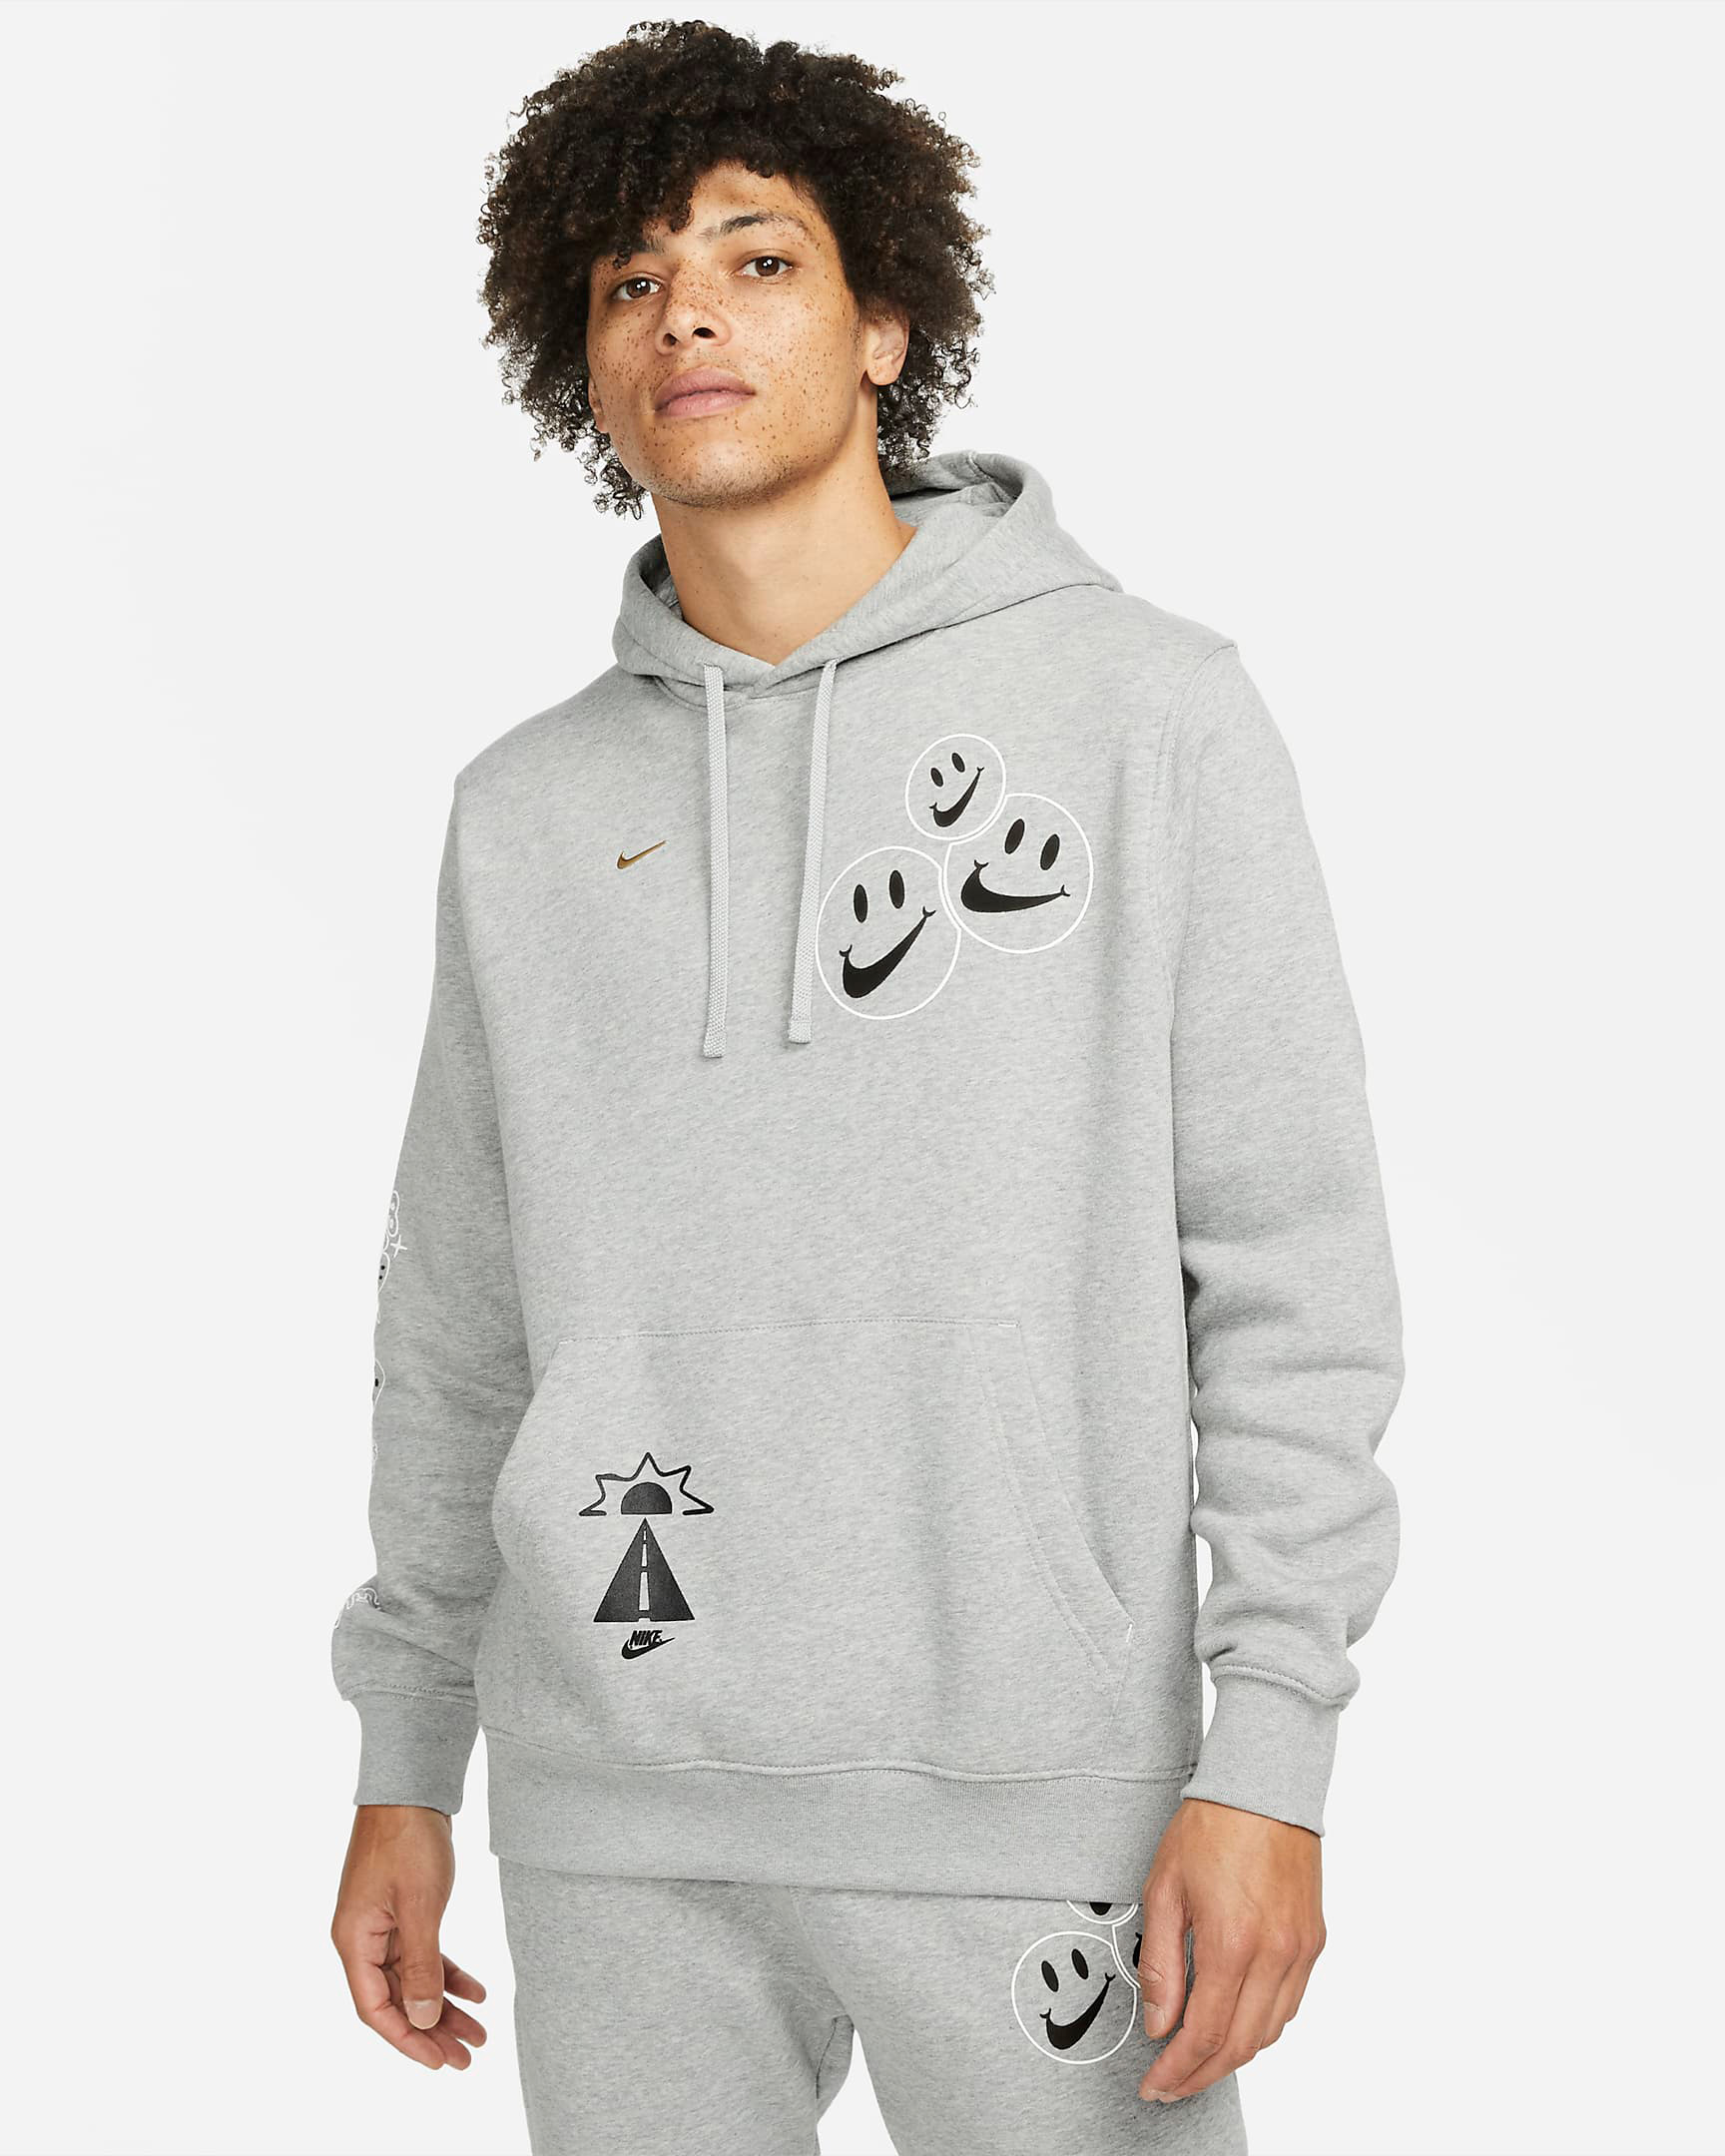 nike-go-the-extra-smile-hoodie-grey-1